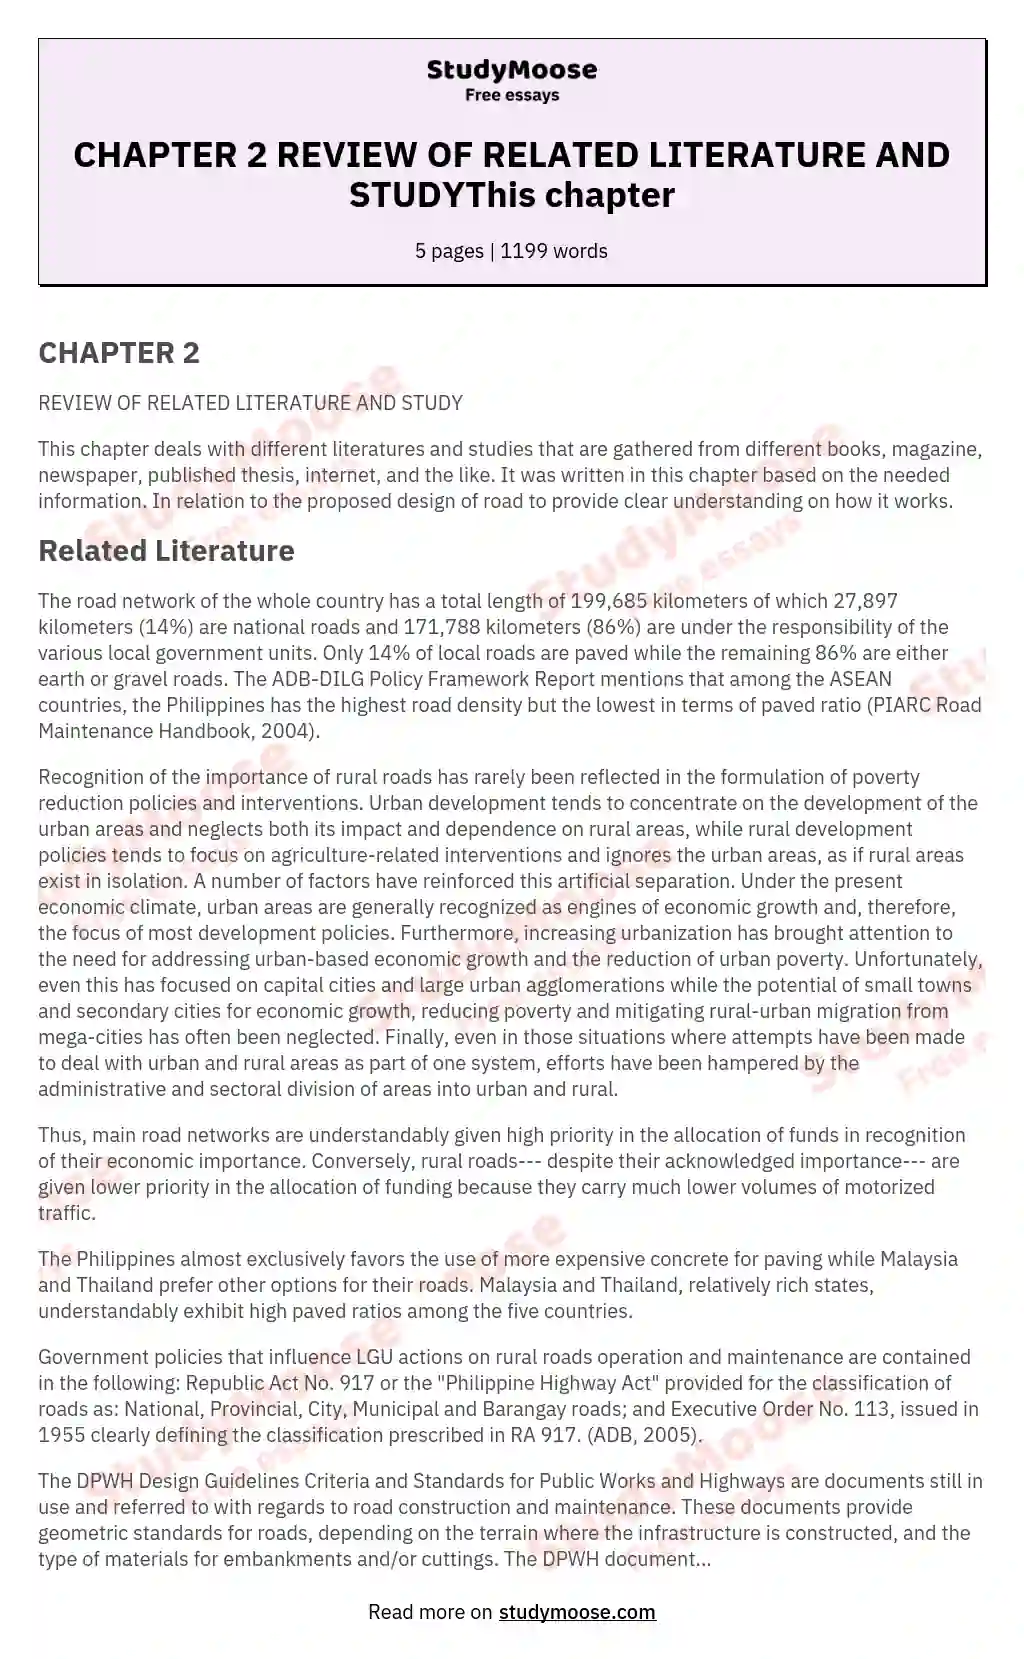 CHAPTER 2 REVIEW OF RELATED LITERATURE AND STUDYThis chapter